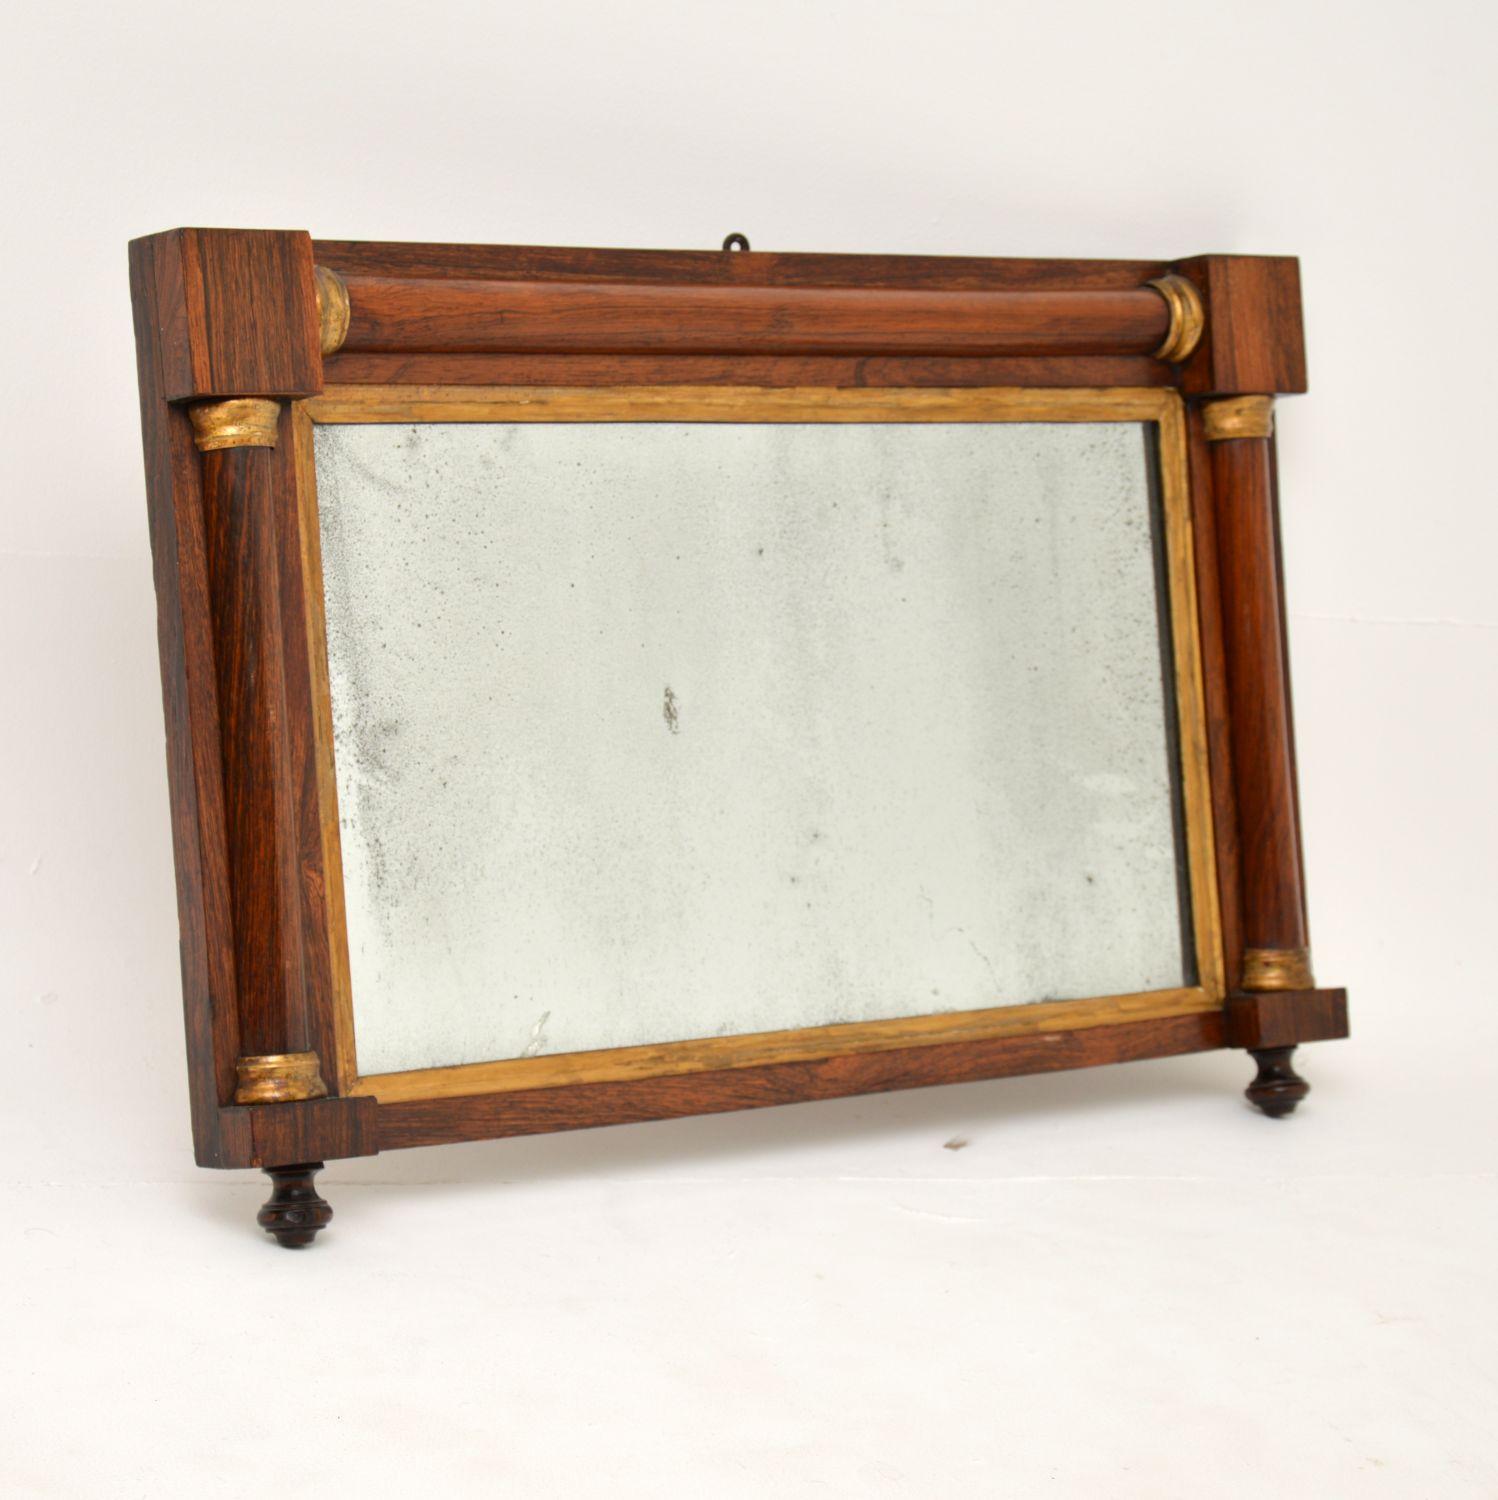 A gorgeous original William IV period over mantle mirror. This was made in England, it dates from around the 1830-1850’s.

It is beautifully made, with a very thick and finely constructed frame. The wood has a stunning colour and amazing grain